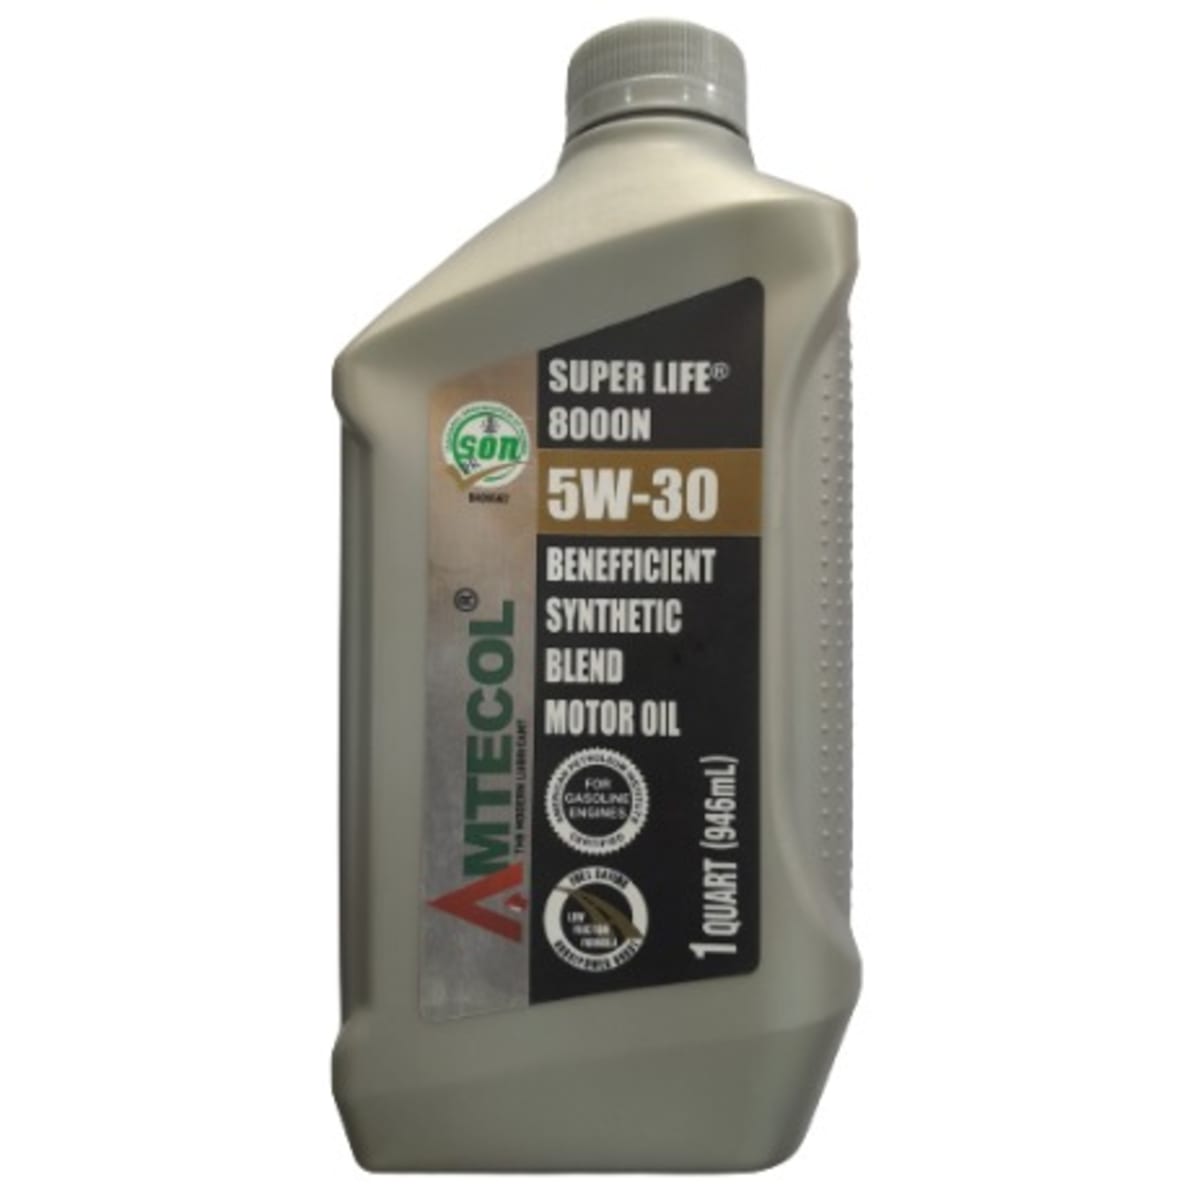 SAE 5w30 Benefficient Synthetic Blend Motor Oil